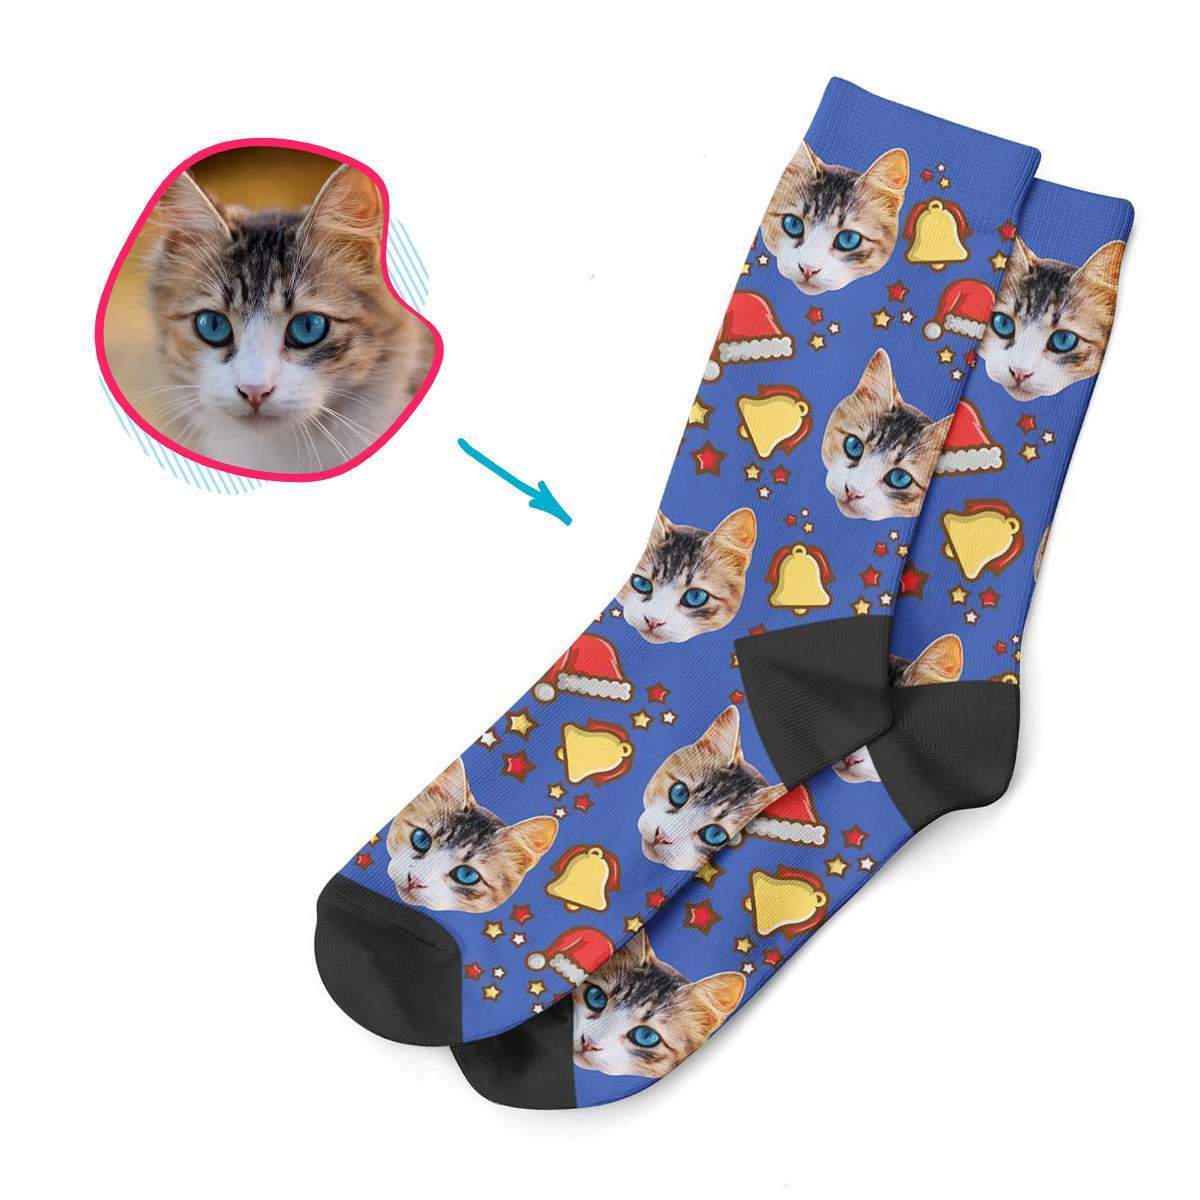 darkblue Santa's Hat socks personalized with photo of face printed on them